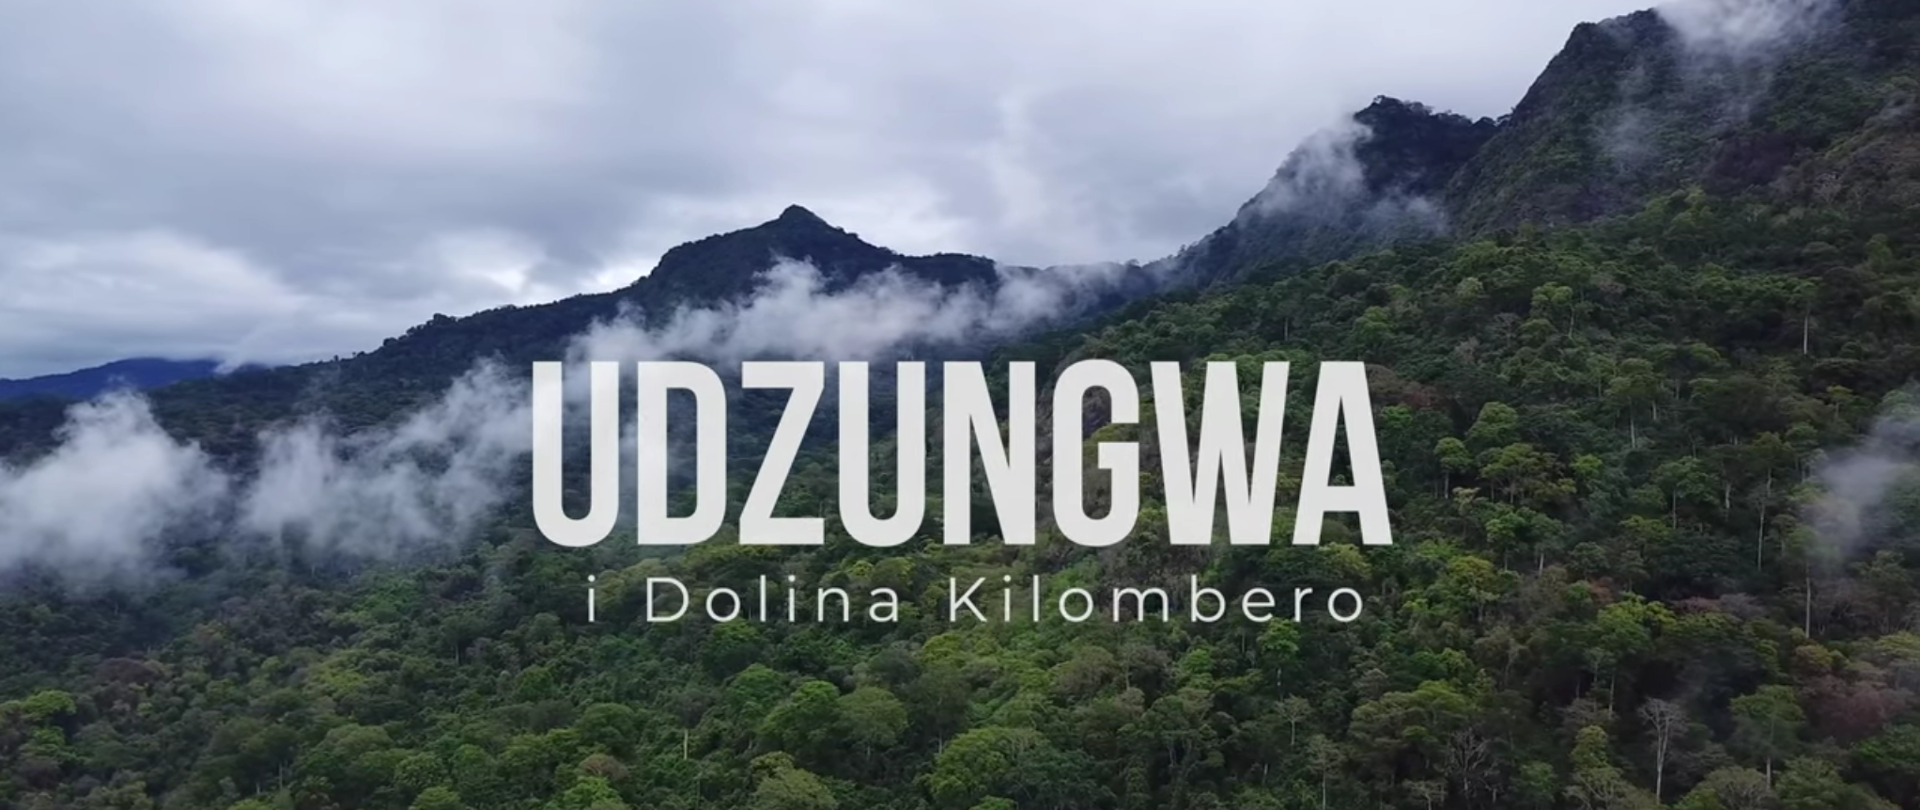 A shot from Udzungwa and the Kilombero Valley documentary showing rain forest on the mountain slopes